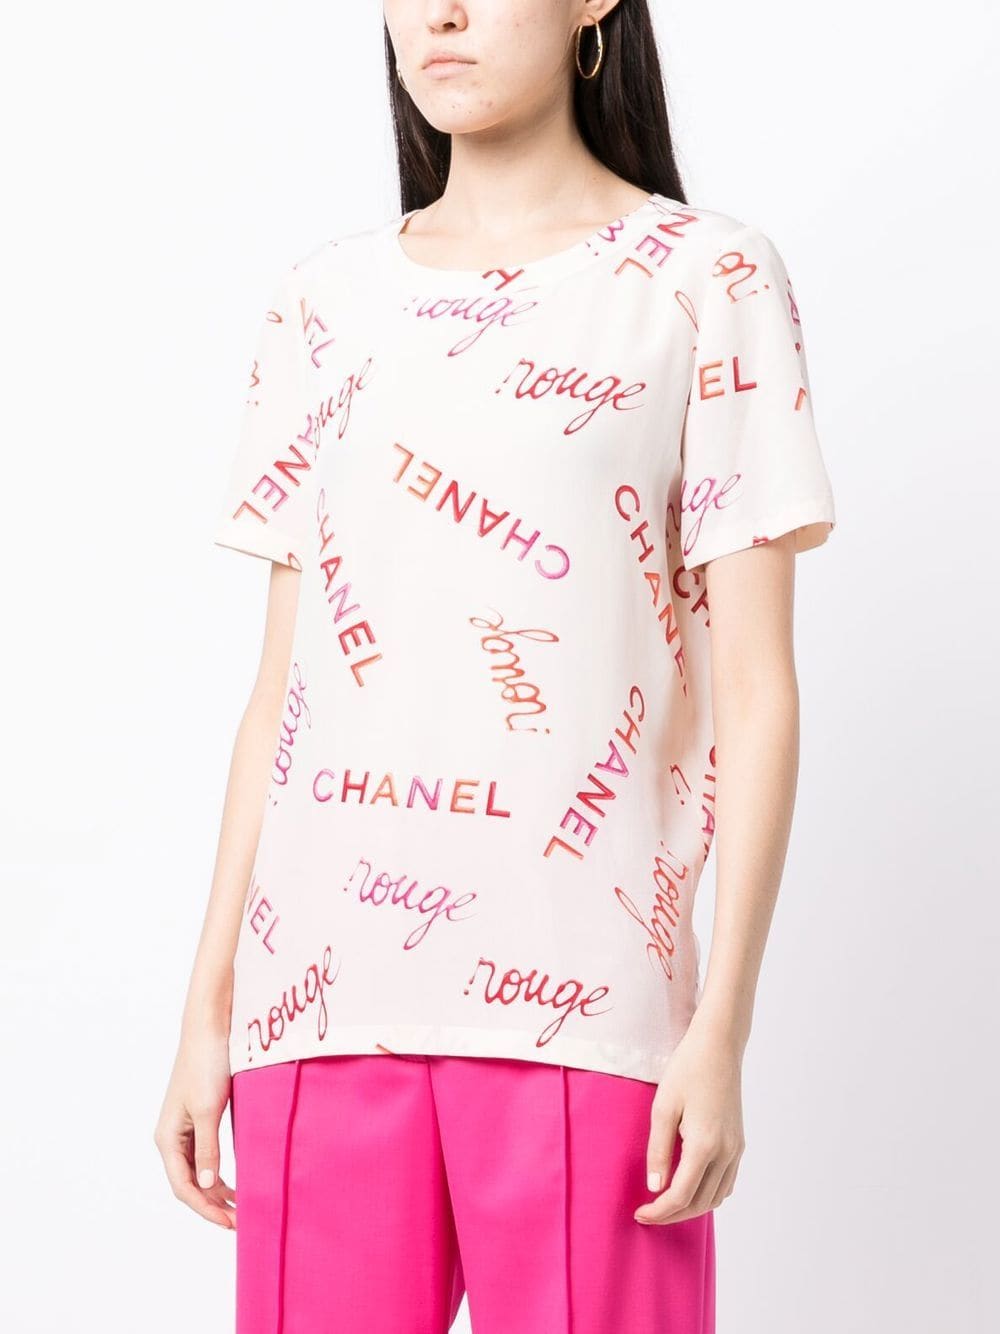 Chanel T-shirt Tops Pink 09c #38 Auction